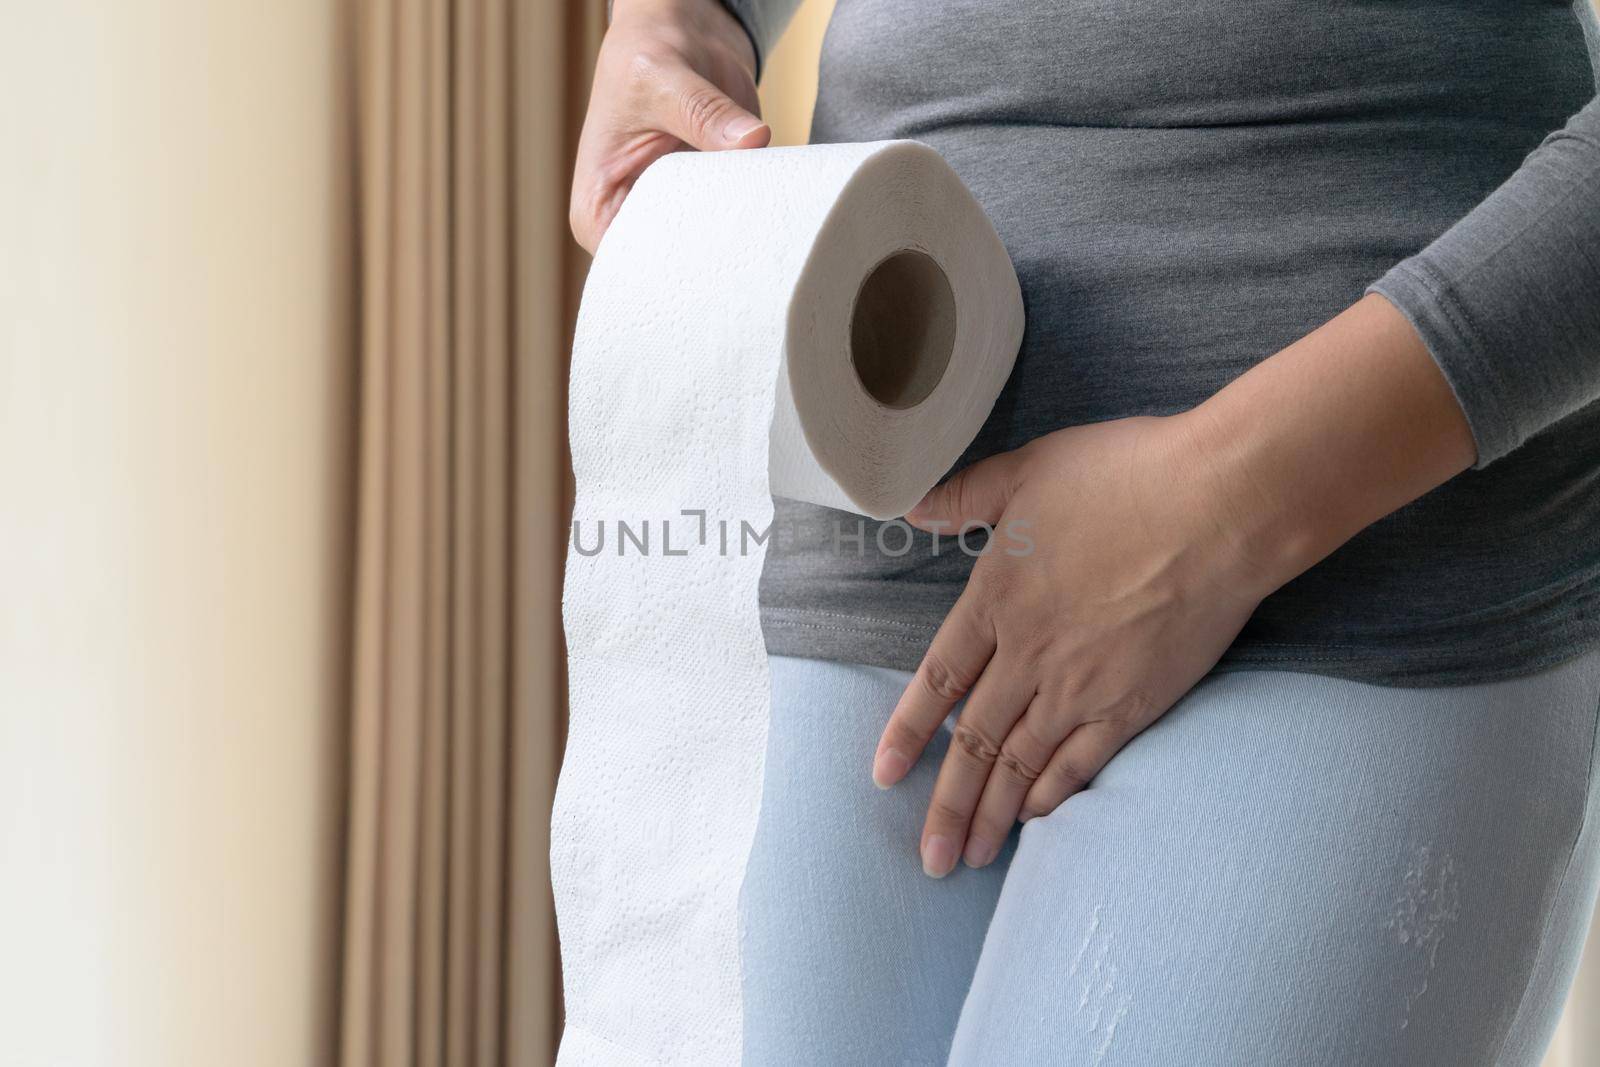 Disorder, Diarrhea, incontinence. Healthcare concept. Woman hand holding her crotch lower abdomen and tissue or toilet paper roll.